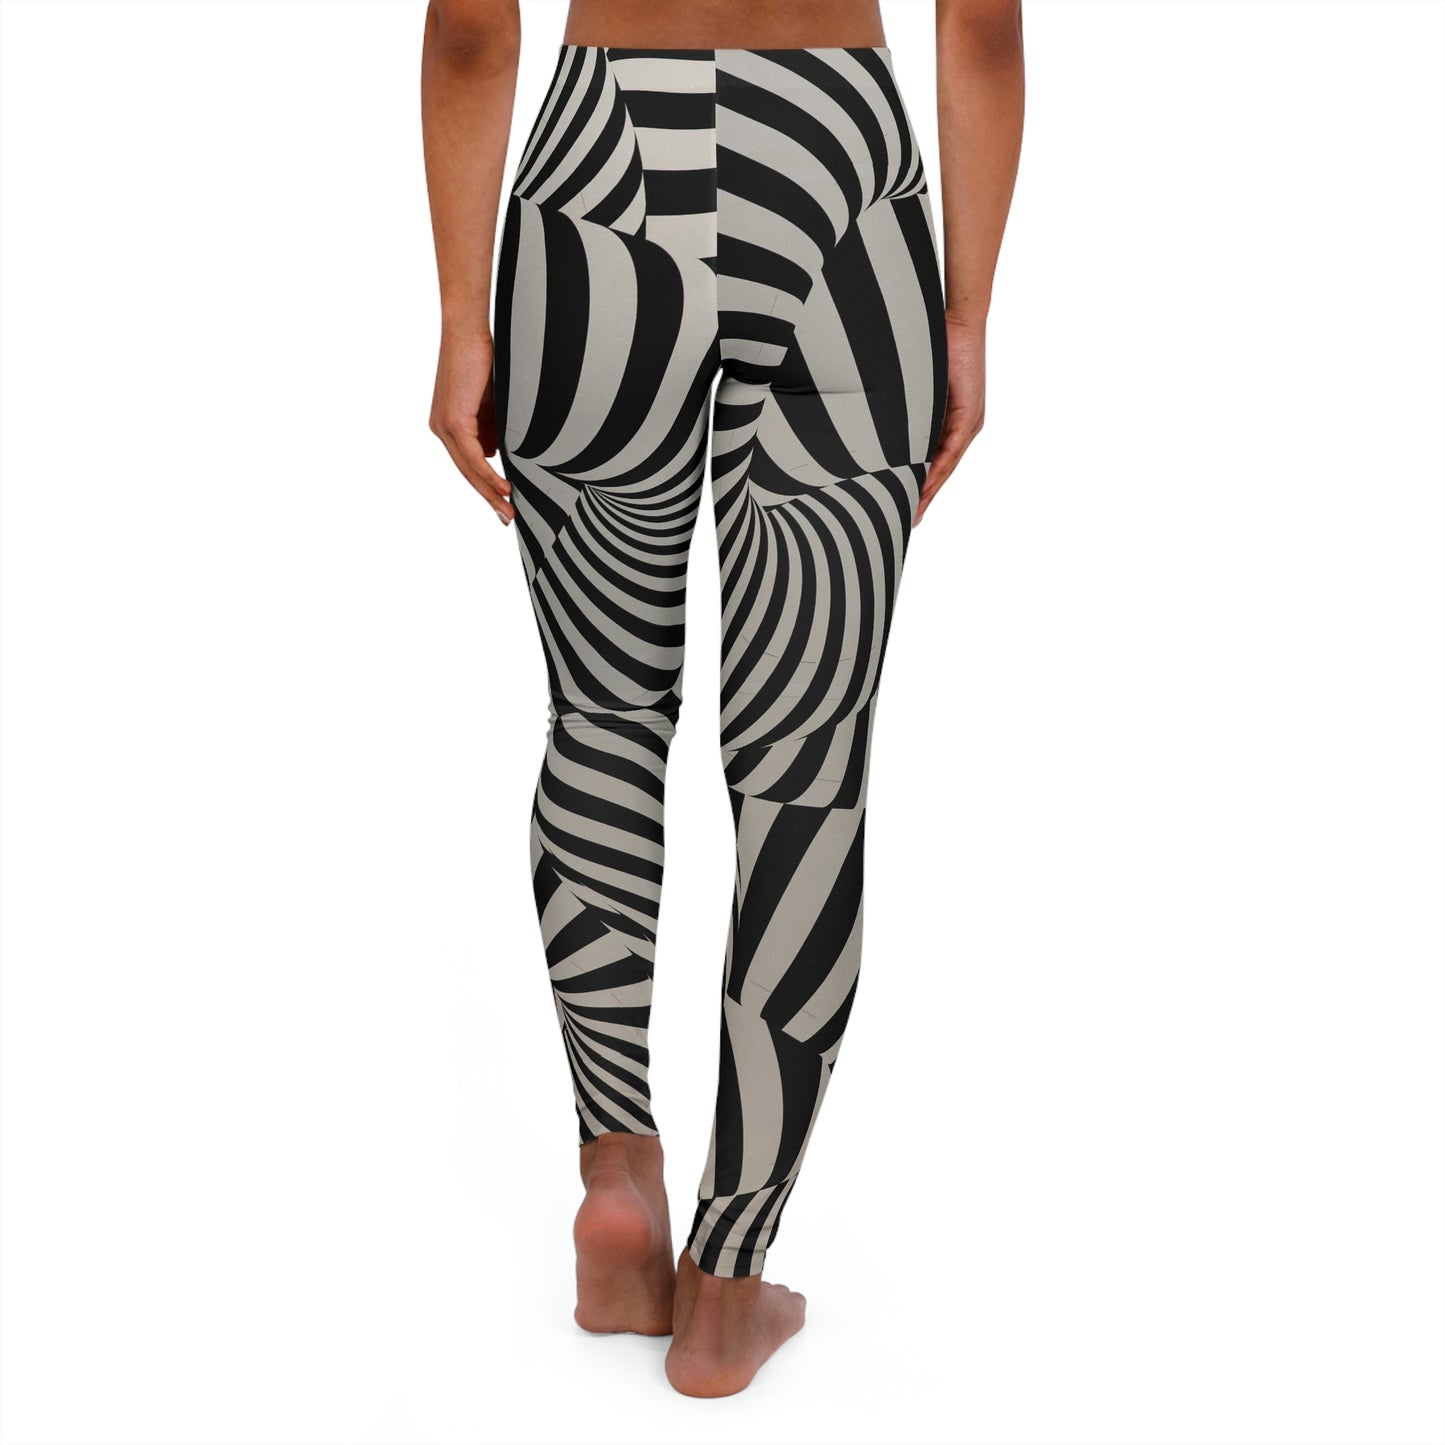 Zebra animal kingdom, Safari Women Leggings, One of a Kind Gift - Workout Activewear tights for Wife Fitness, Best Friend, mom and me tights Christmas Gift